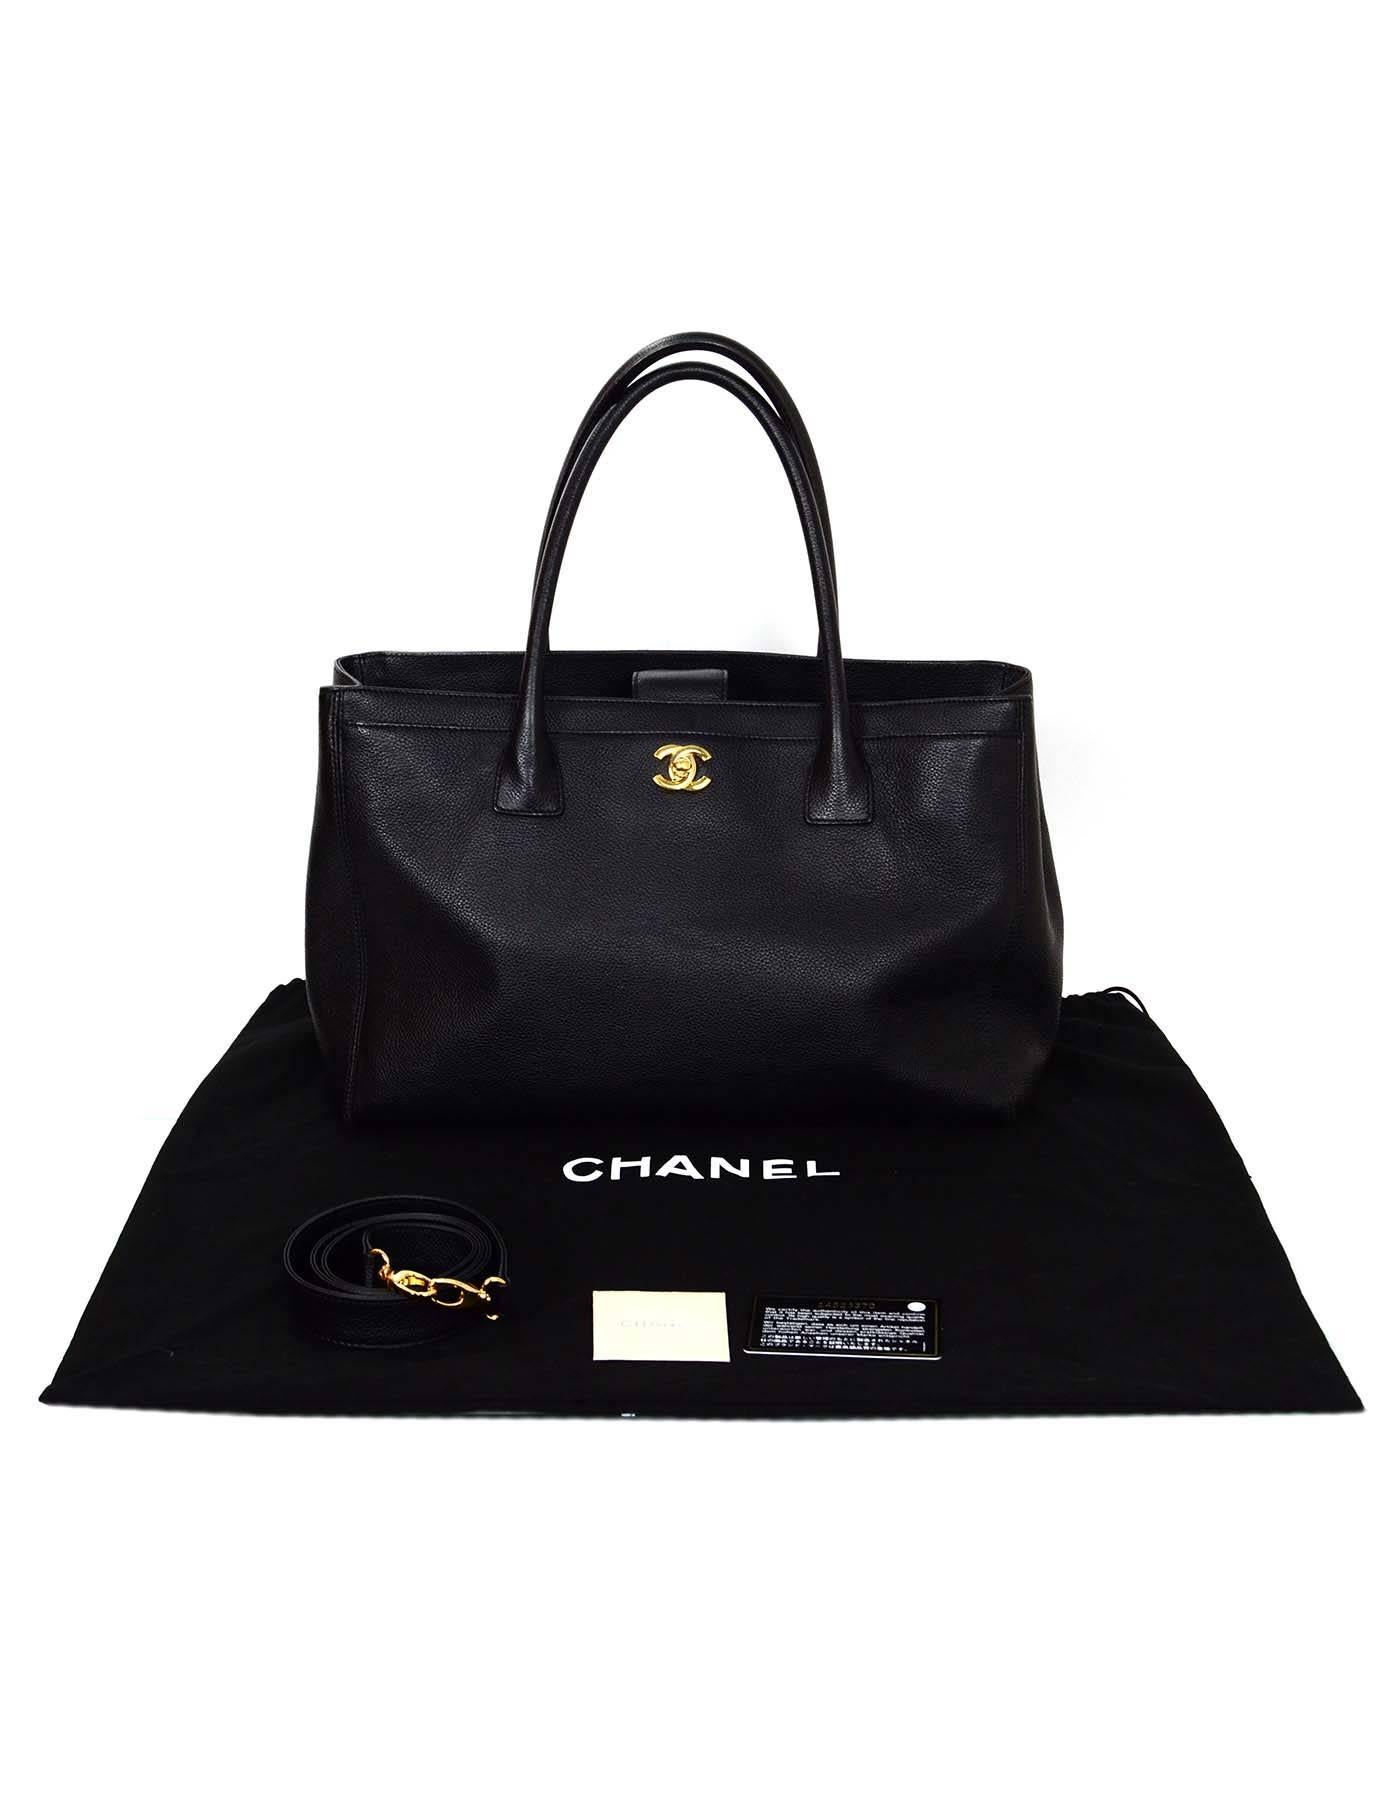 Chanel Black Leather Cerf Executive Tote Bag w/ Strap 6